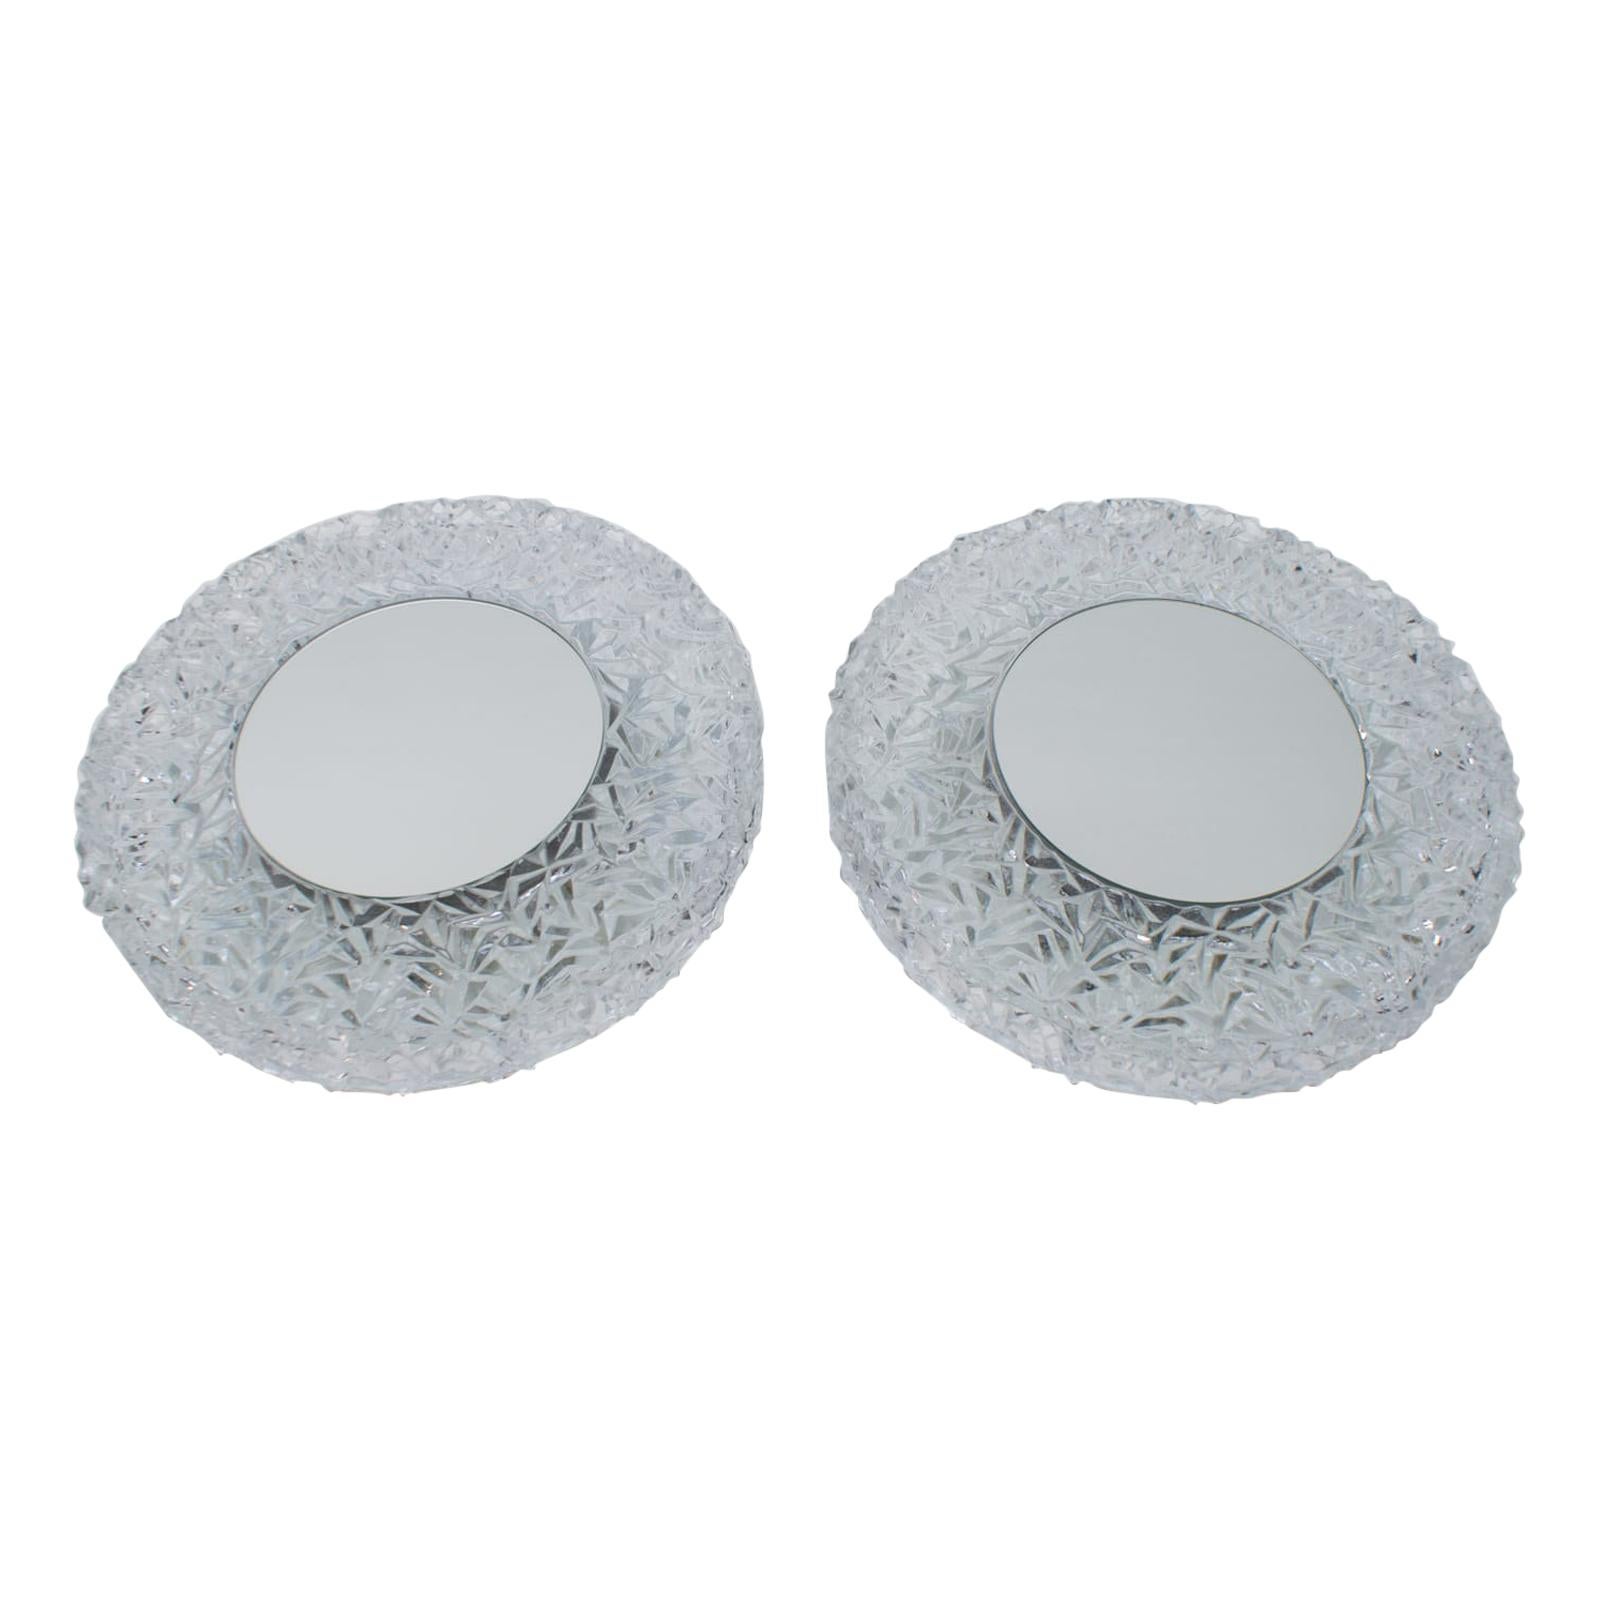 Set of 2 Textured Glass and Mirror Ceiling Wall Flushmounts, Hillebrand, 1960s For Sale